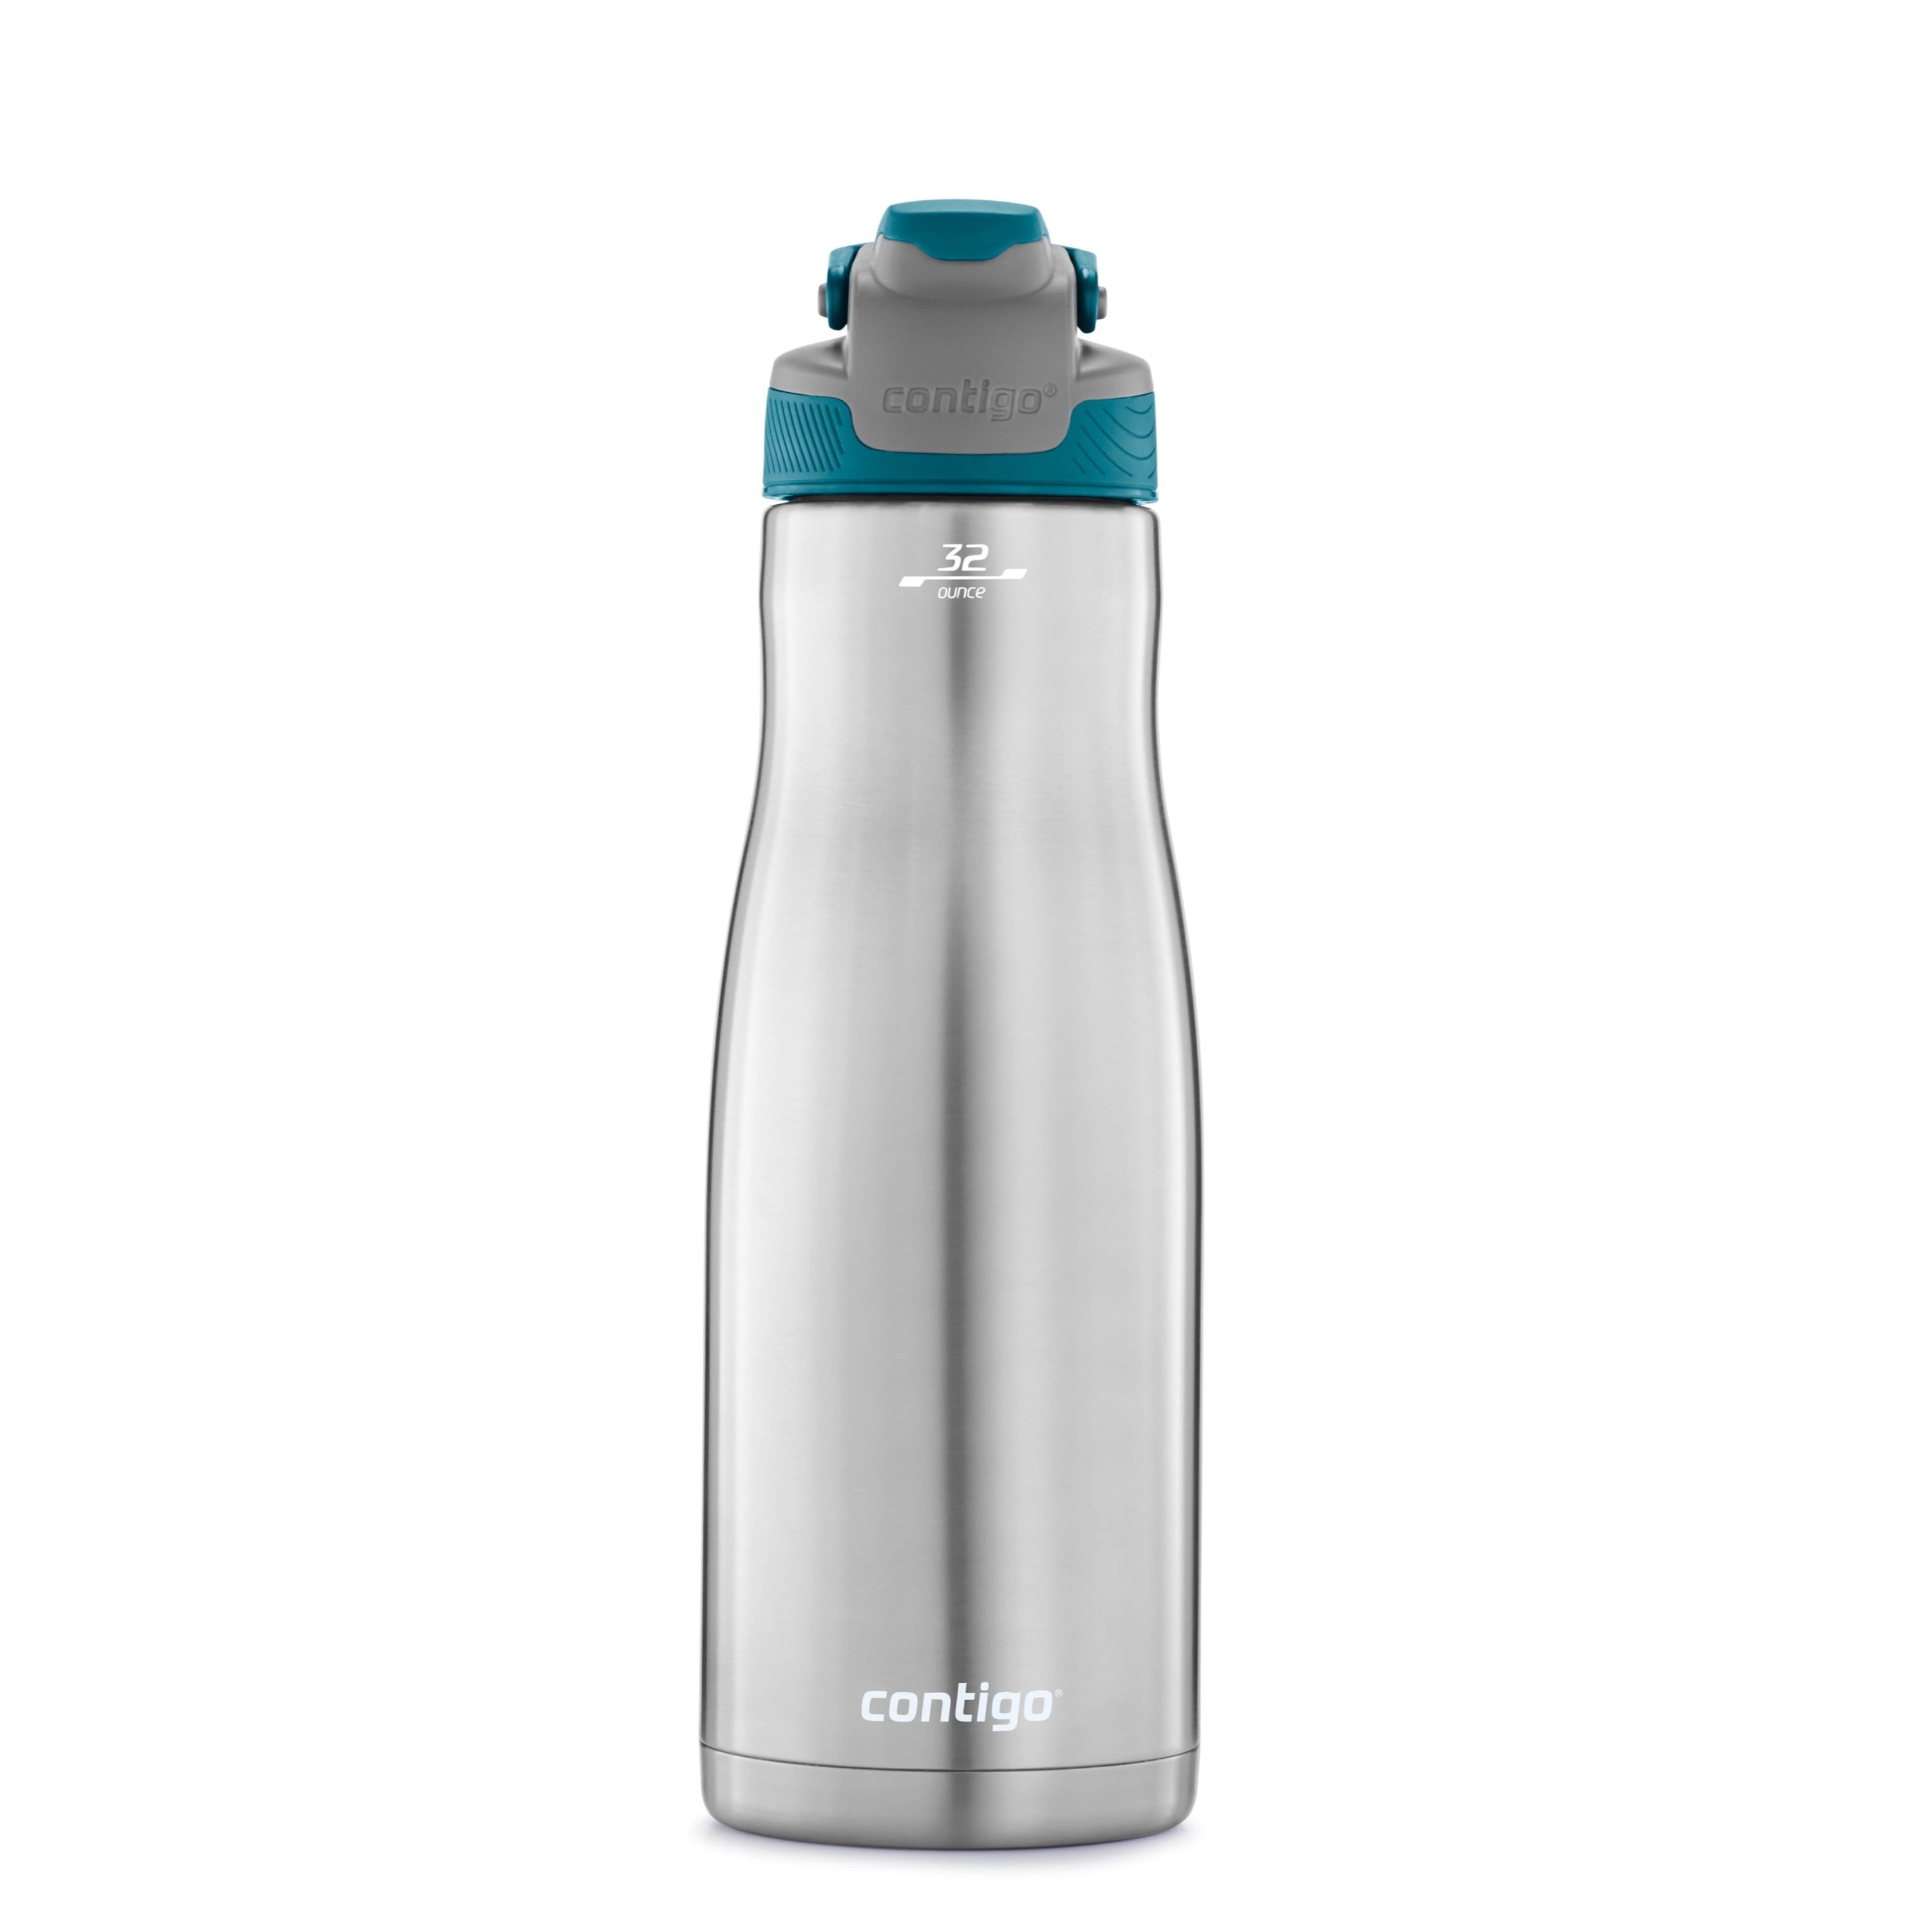 Contigo Cortland Chill 2.0 Water Bottle with AUTOSEAL Lid, Stainless Steel  Water Bottle, 24 oz., 2-Pack, Juniper & Dragon Fruit